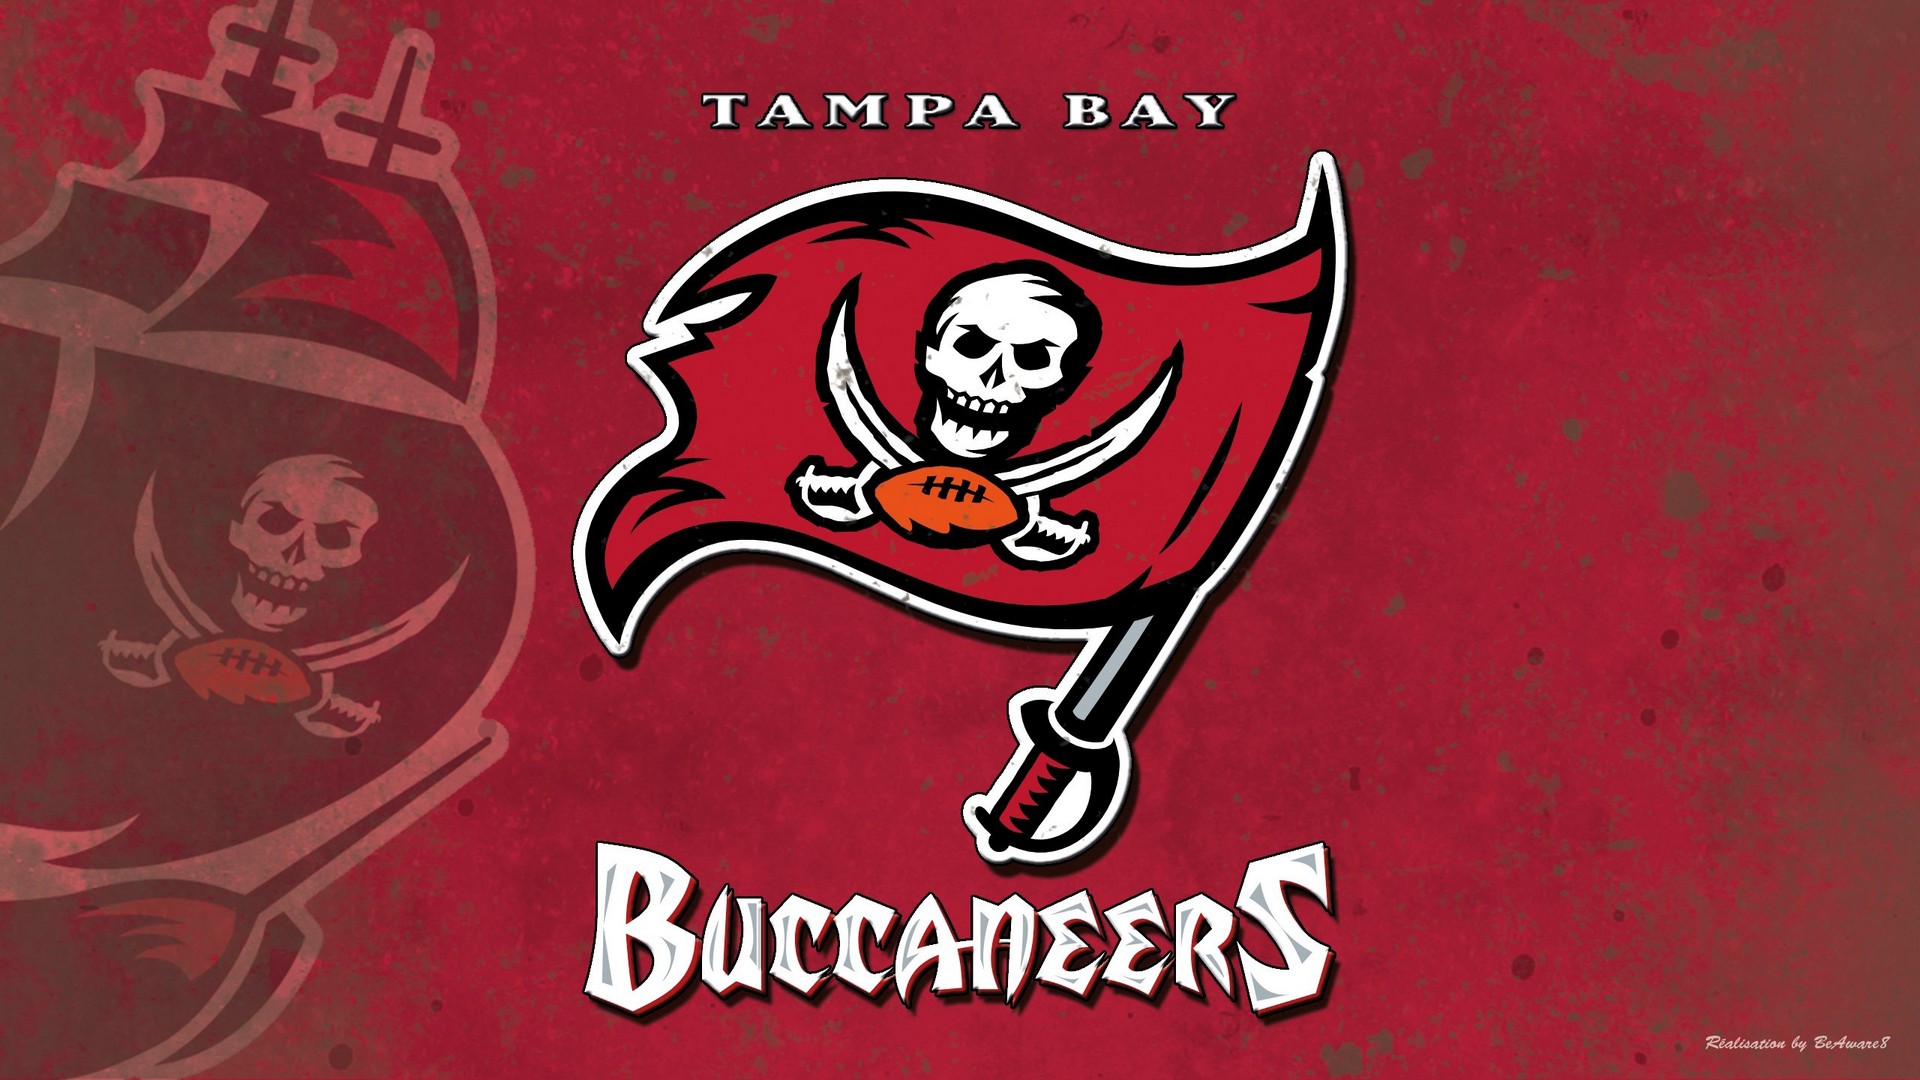 HD Tampa Bay Buccaneers Backgrounds With high-resolution 1920X1080 pixel. You can use this wallpaper for your Mac or Windows Desktop Background, iPhone, Android or Tablet and another Smartphone device